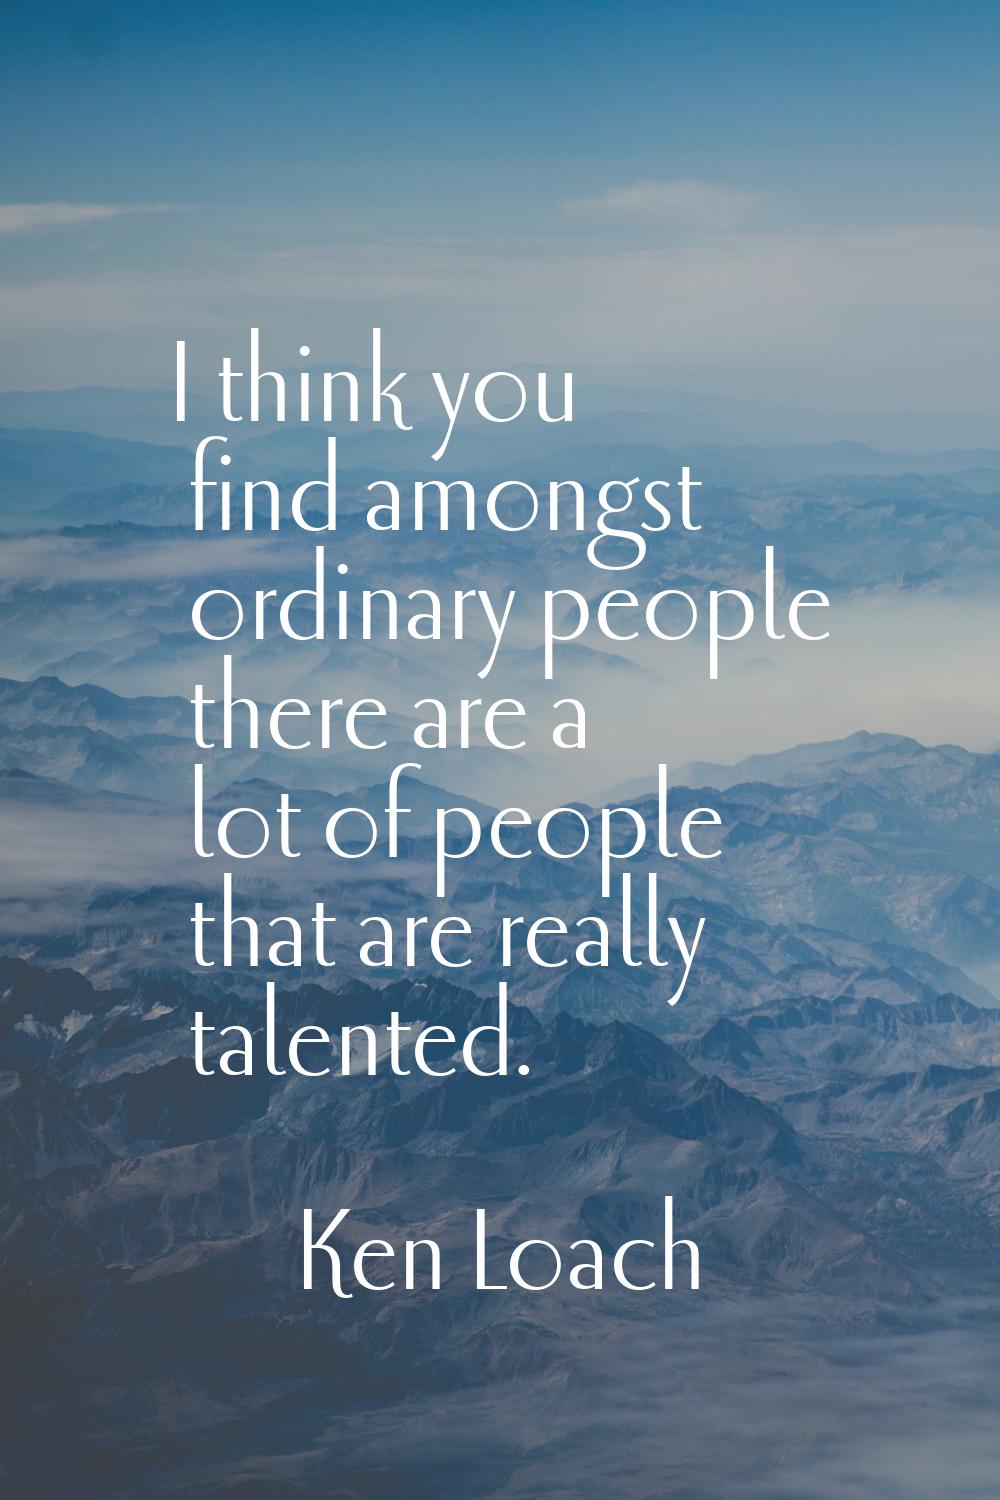 I think you find amongst ordinary people there are a lot of people that are really talented.